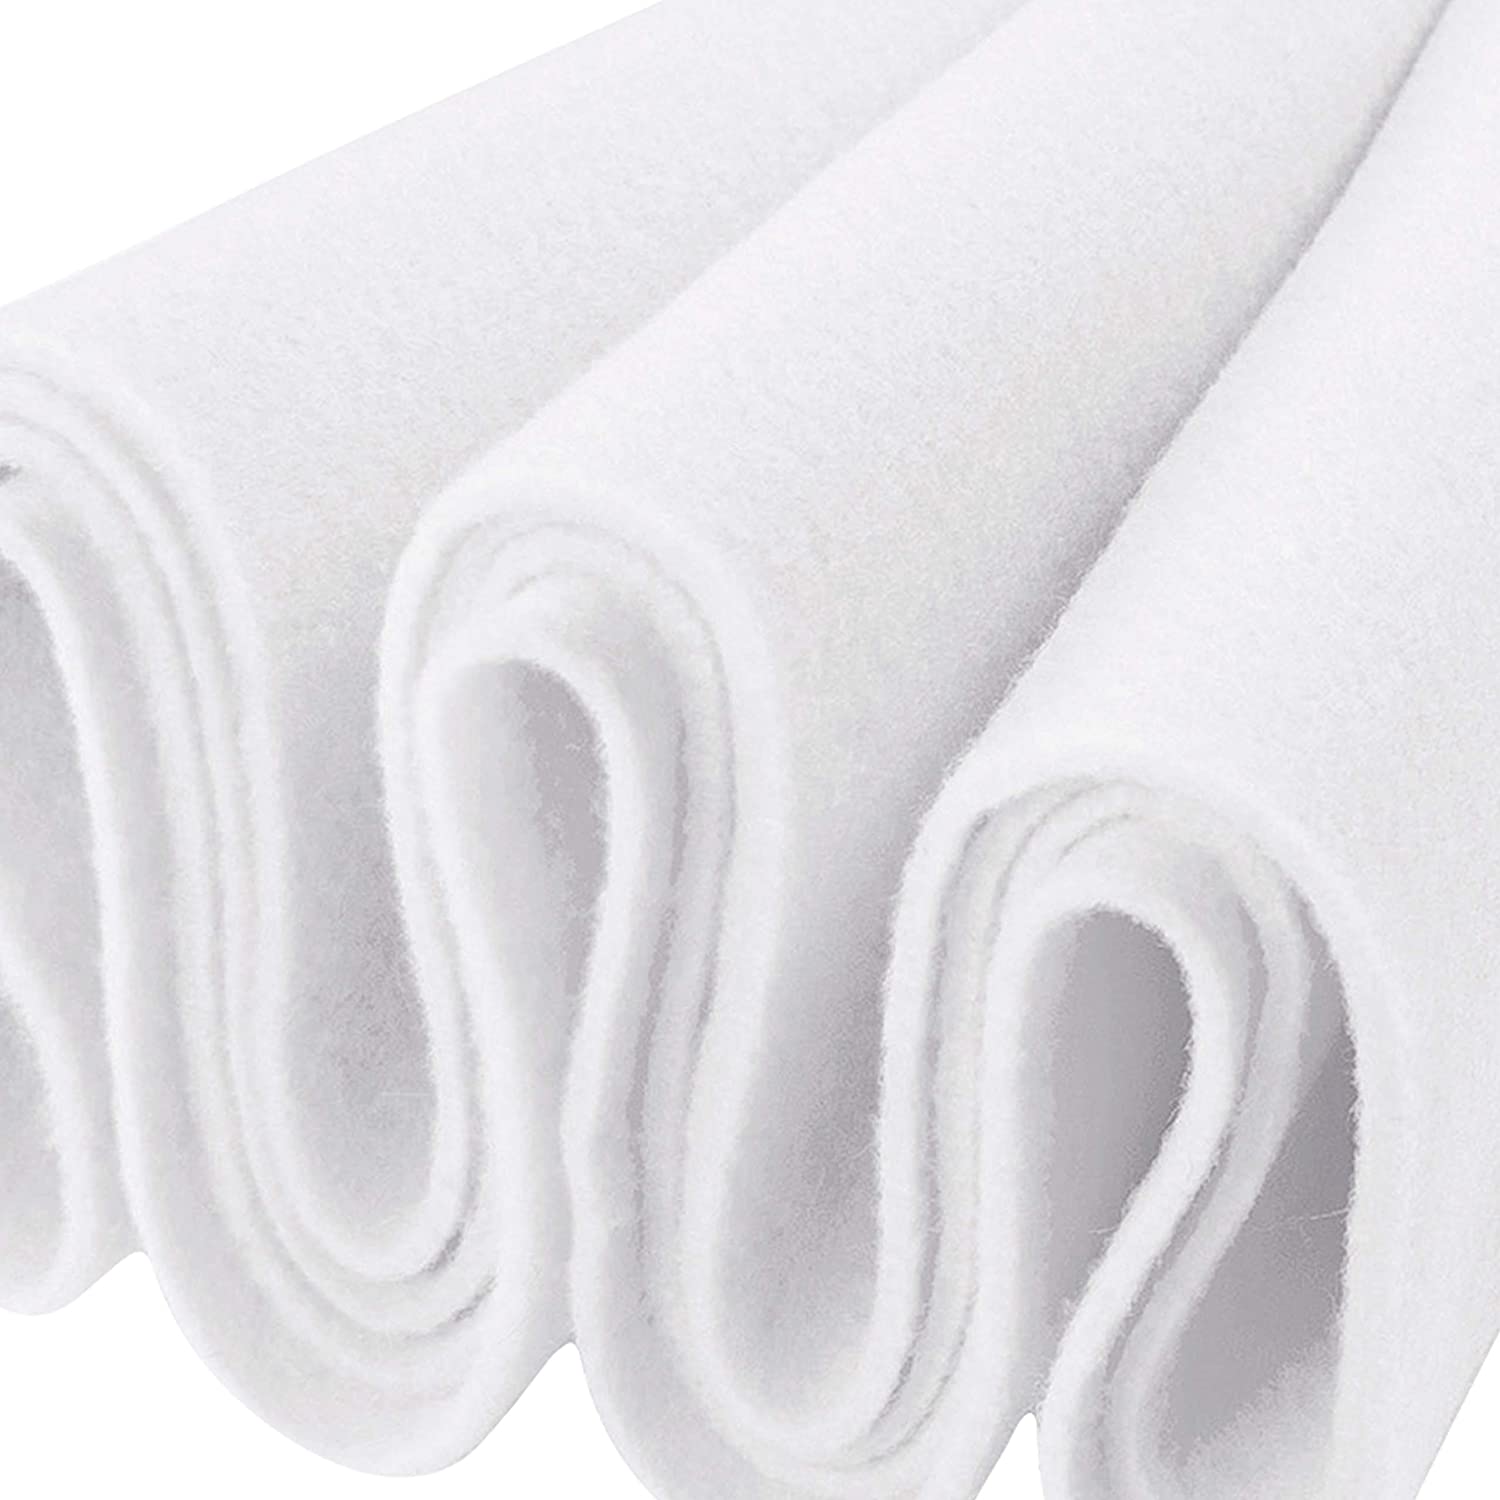 FabricLA Craft Felt Fabric - 36 X 36 Inch Wide & 1.6mm Thick Felt Fabric  by The Yard - Use This Soft Felt Roll for Crafts - Felt Material Pack -  White 